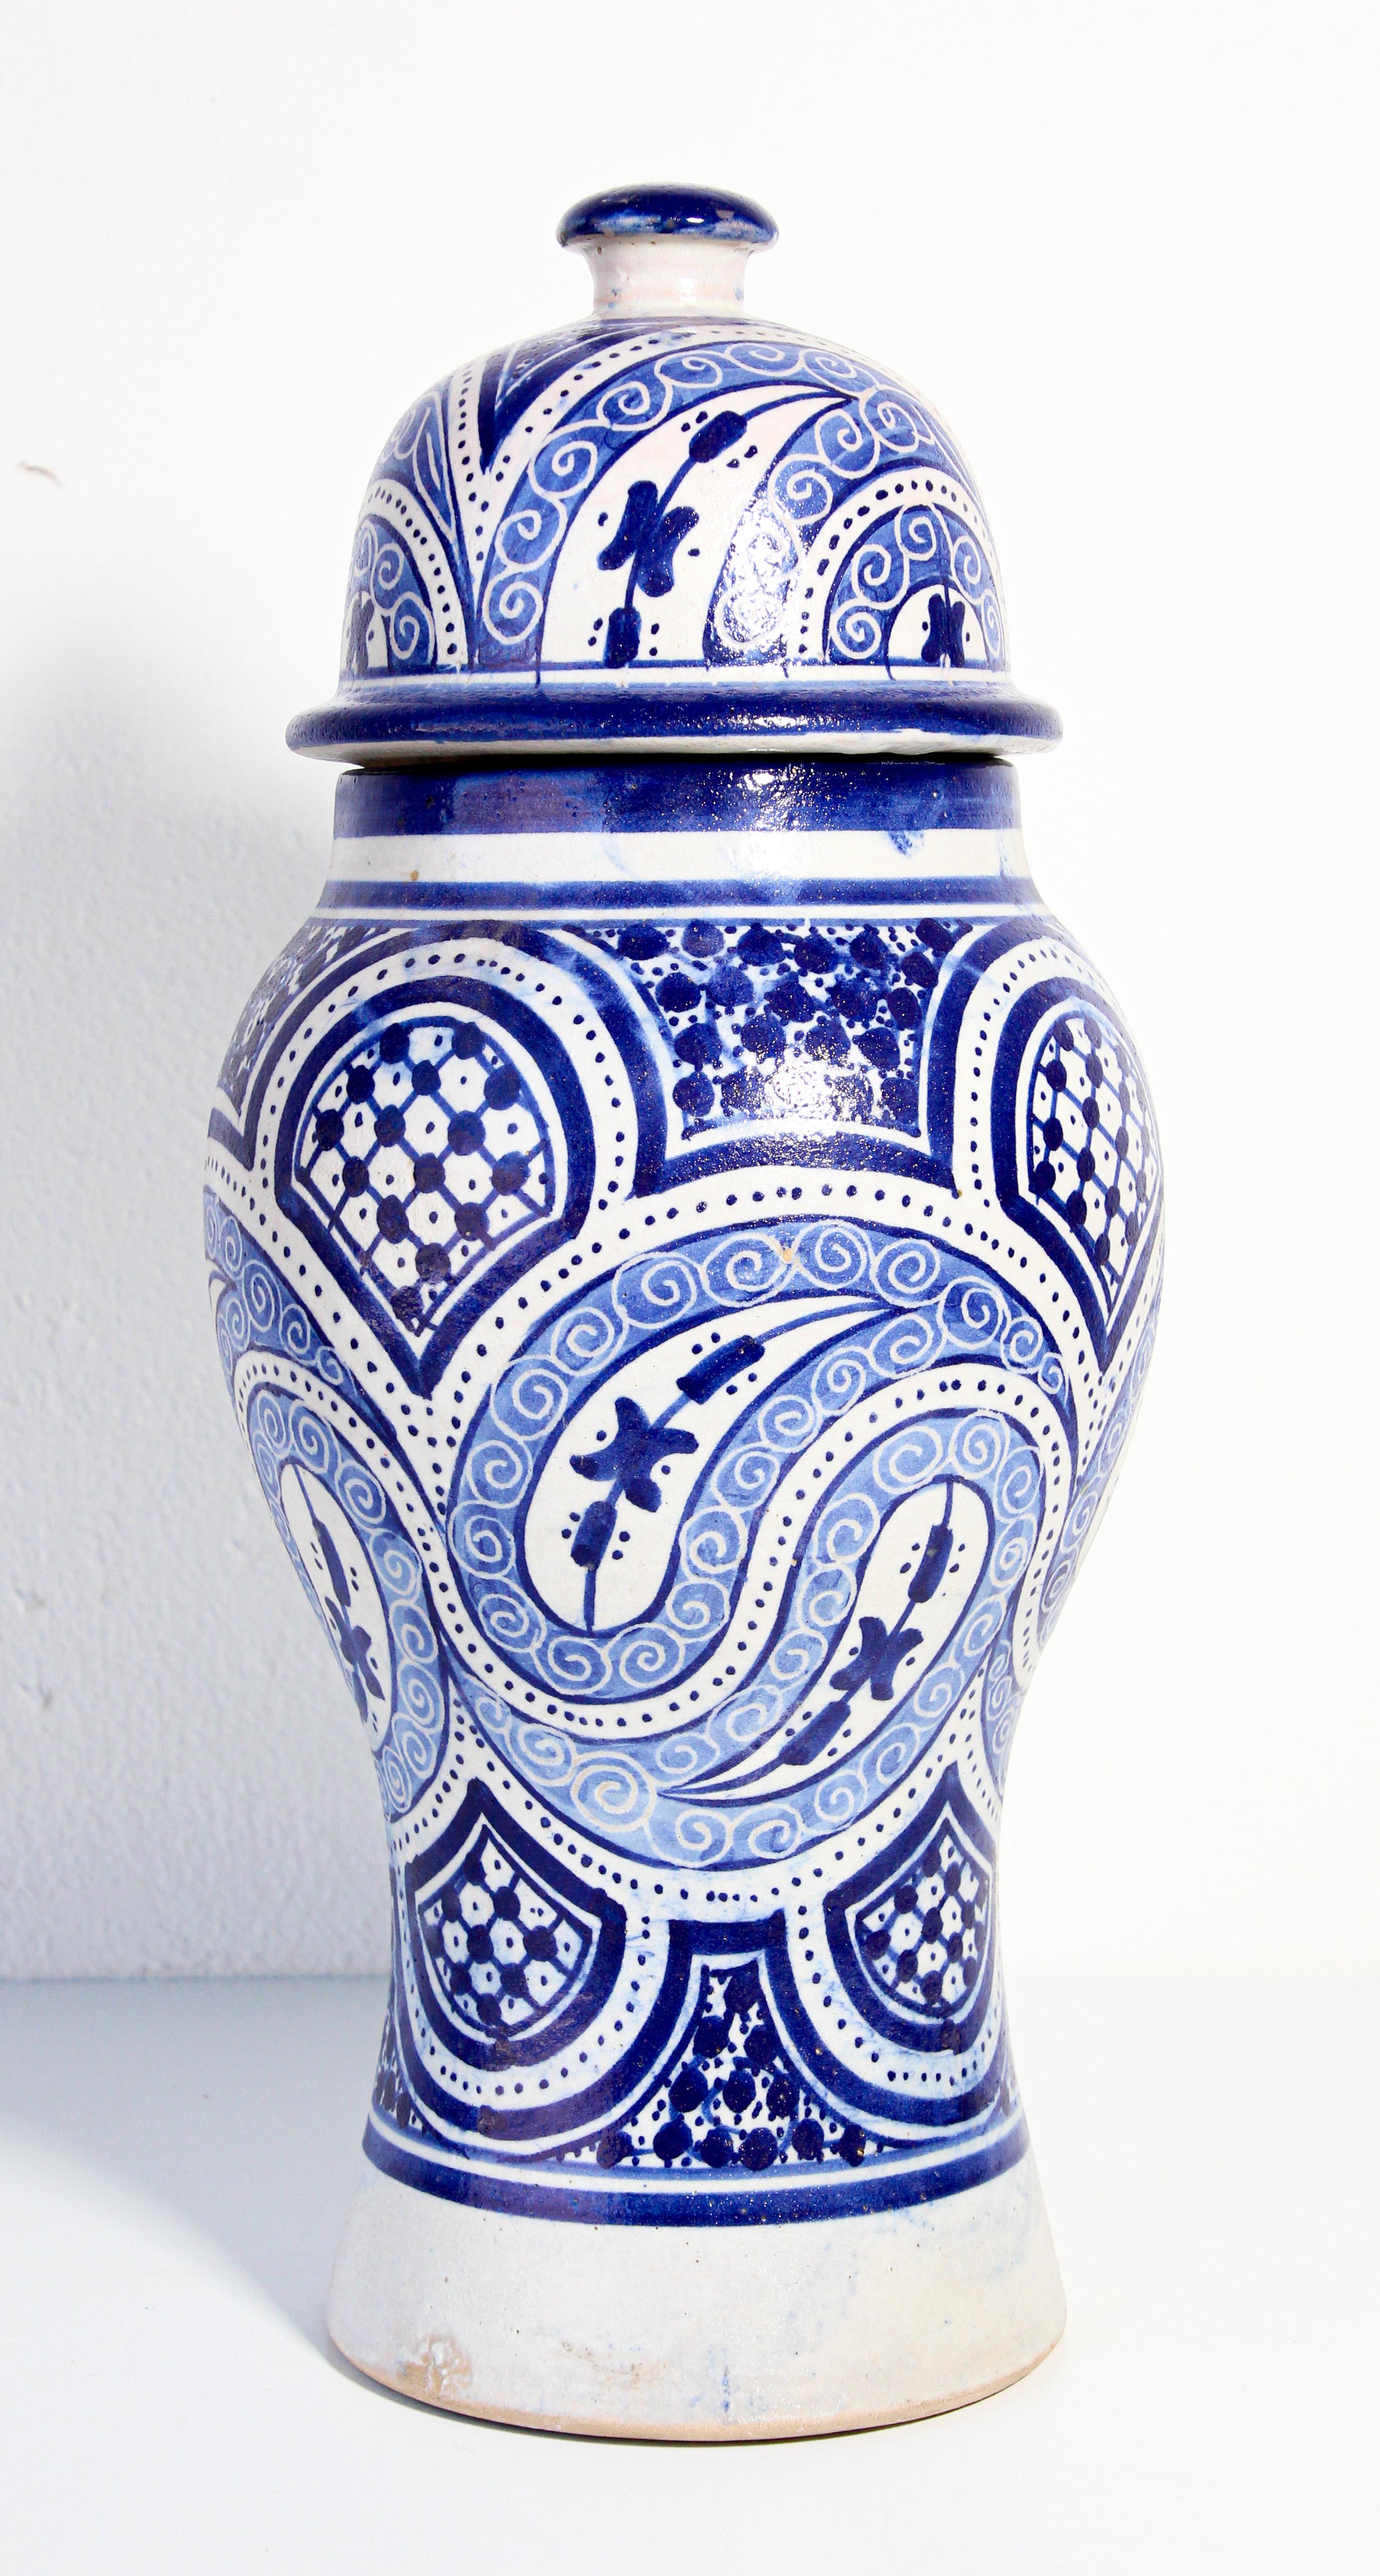 Moroccan glazed ceramic urn with lid from Fez.
Moorish style ceramic handcrafted decorative jar hand painted floral and geometric design.
Royal blue and ivory color Moorish design.
Size: 16 in. height x 7 in. diameter.
Vintage handcrafted decorative